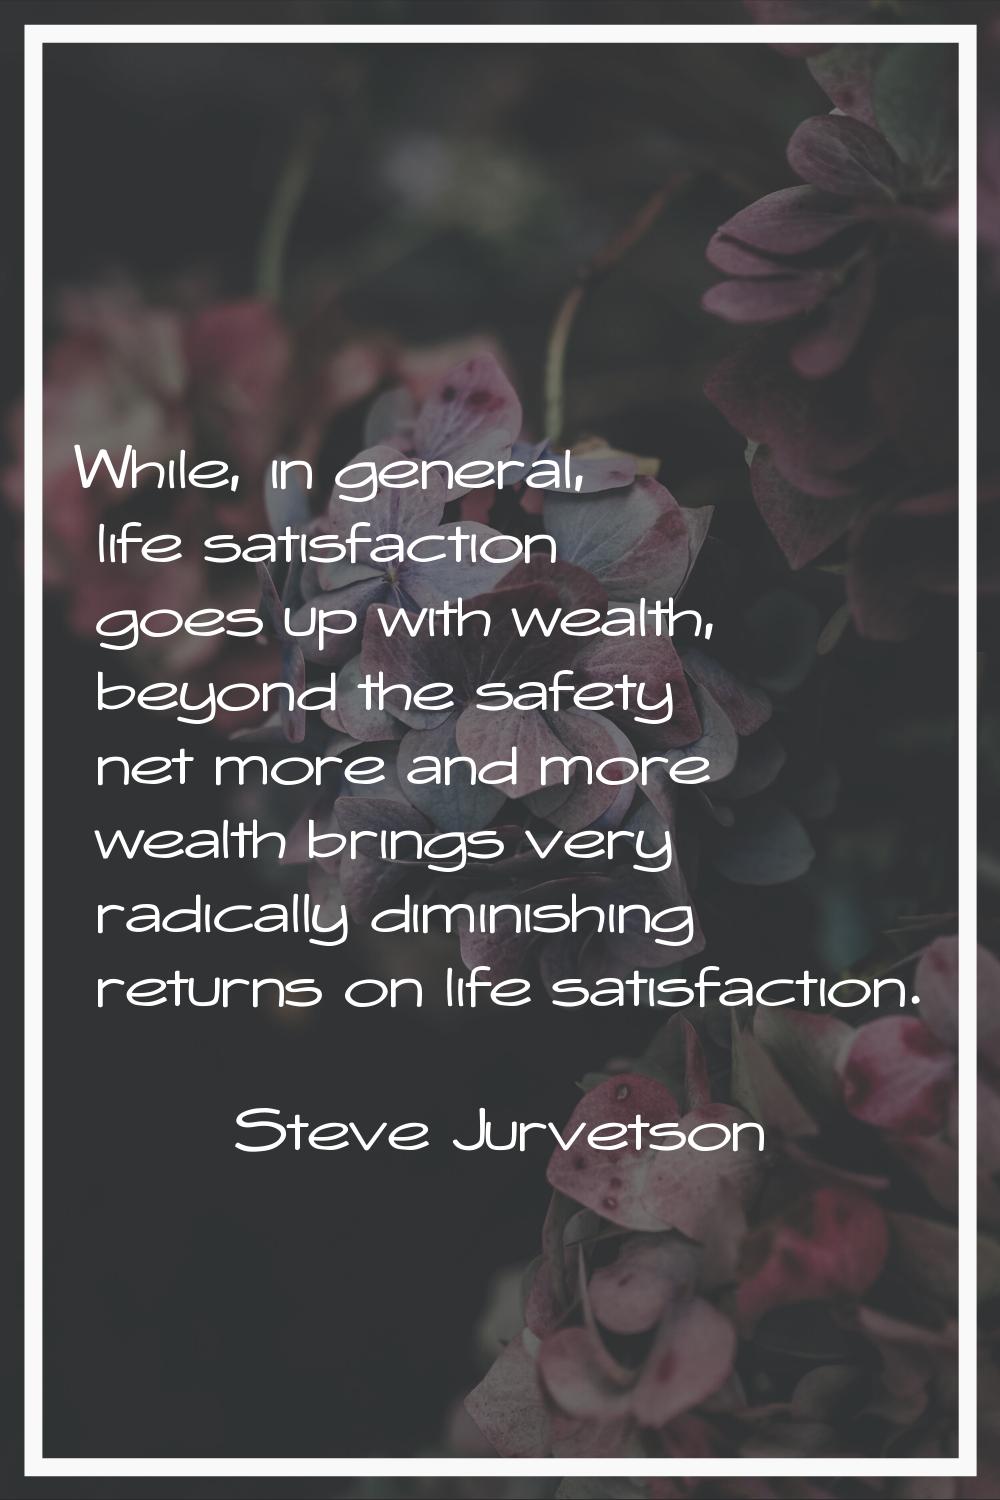 While, in general, life satisfaction goes up with wealth, beyond the safety net more and more wealt